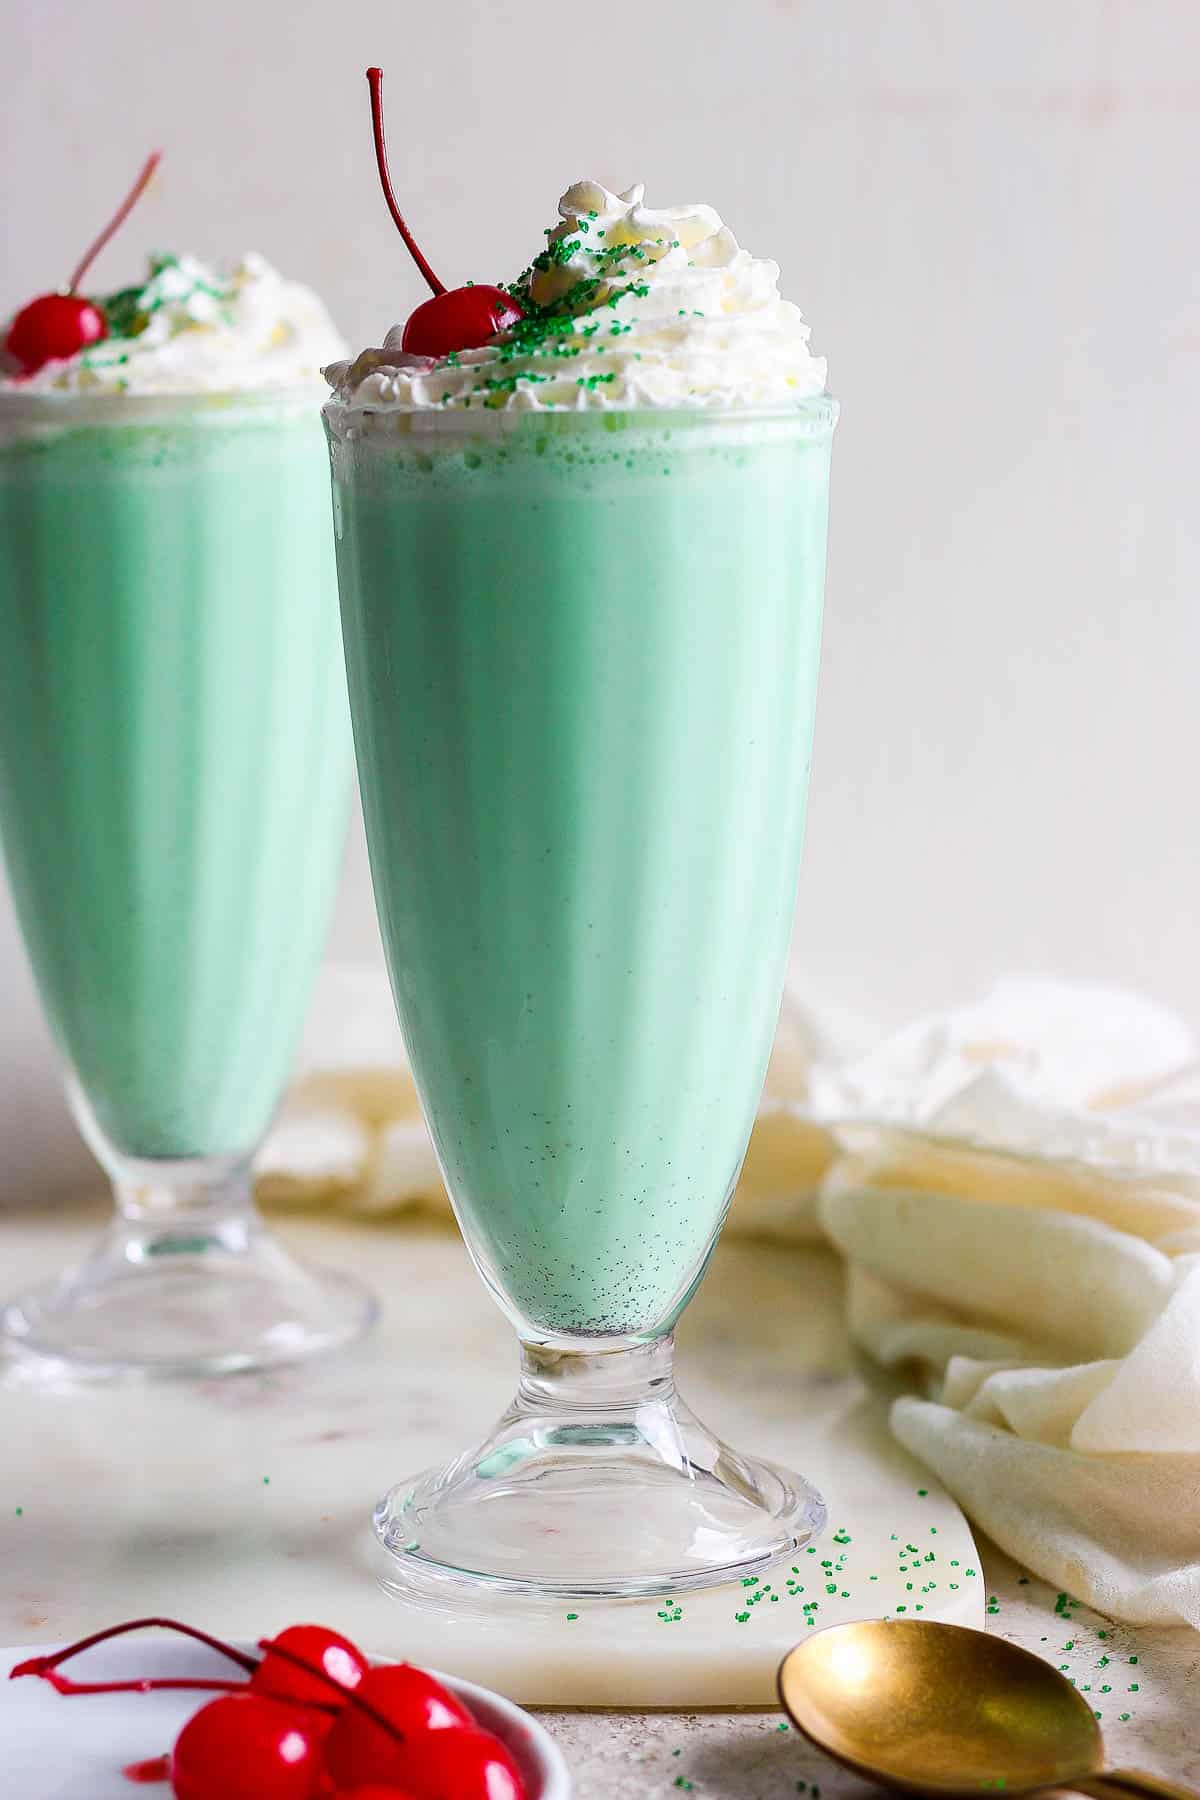 Two glasses filled with the shamrock shake mixture and topped with whipped cream, a cherry, and green sprinkles.